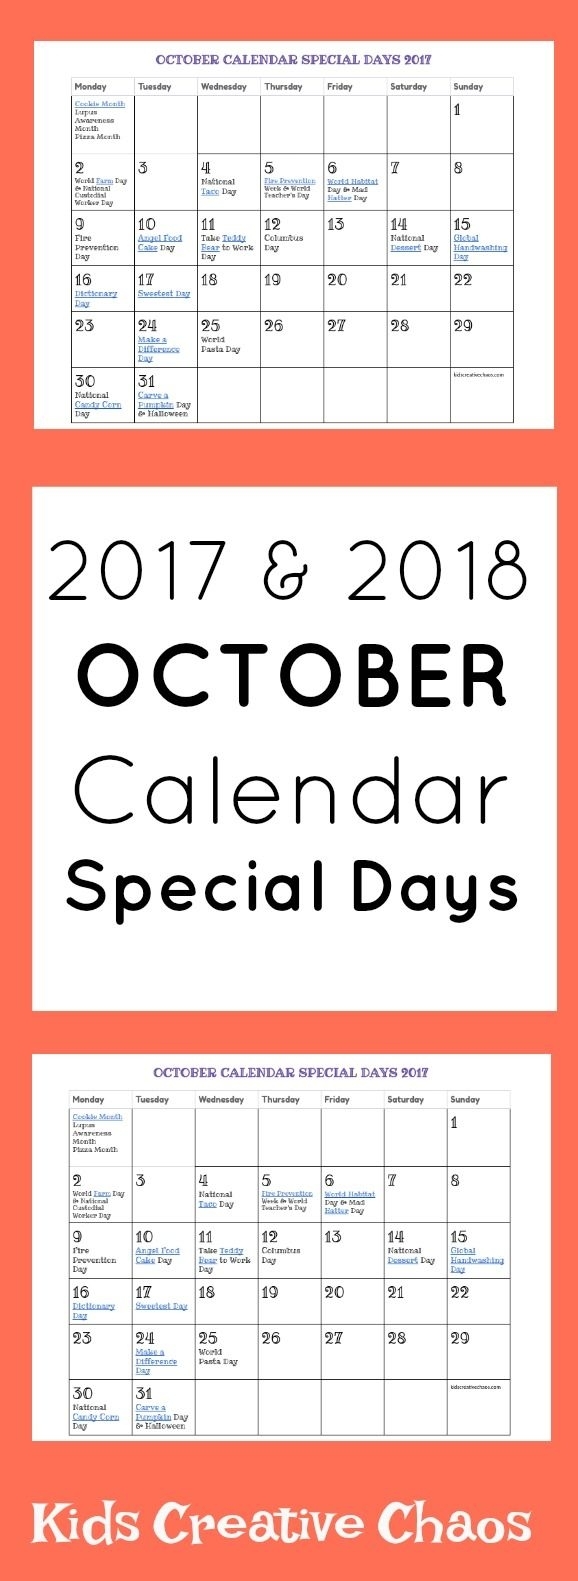 October Calendar Of Special Days And Unique Holidays For inside Spec Ial Days In 2020